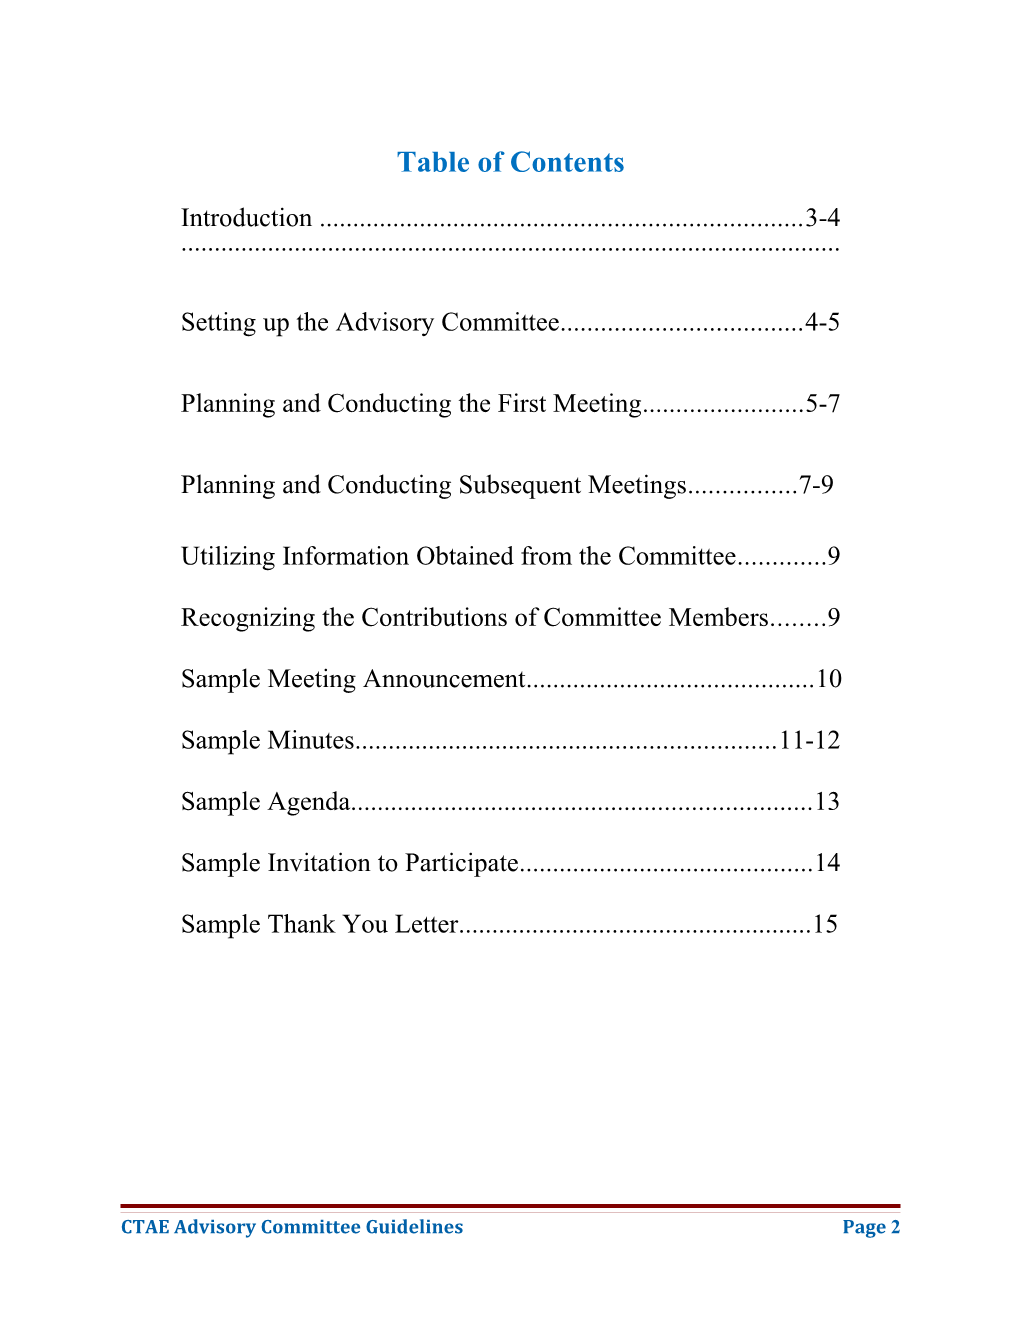 Table of Contents s129